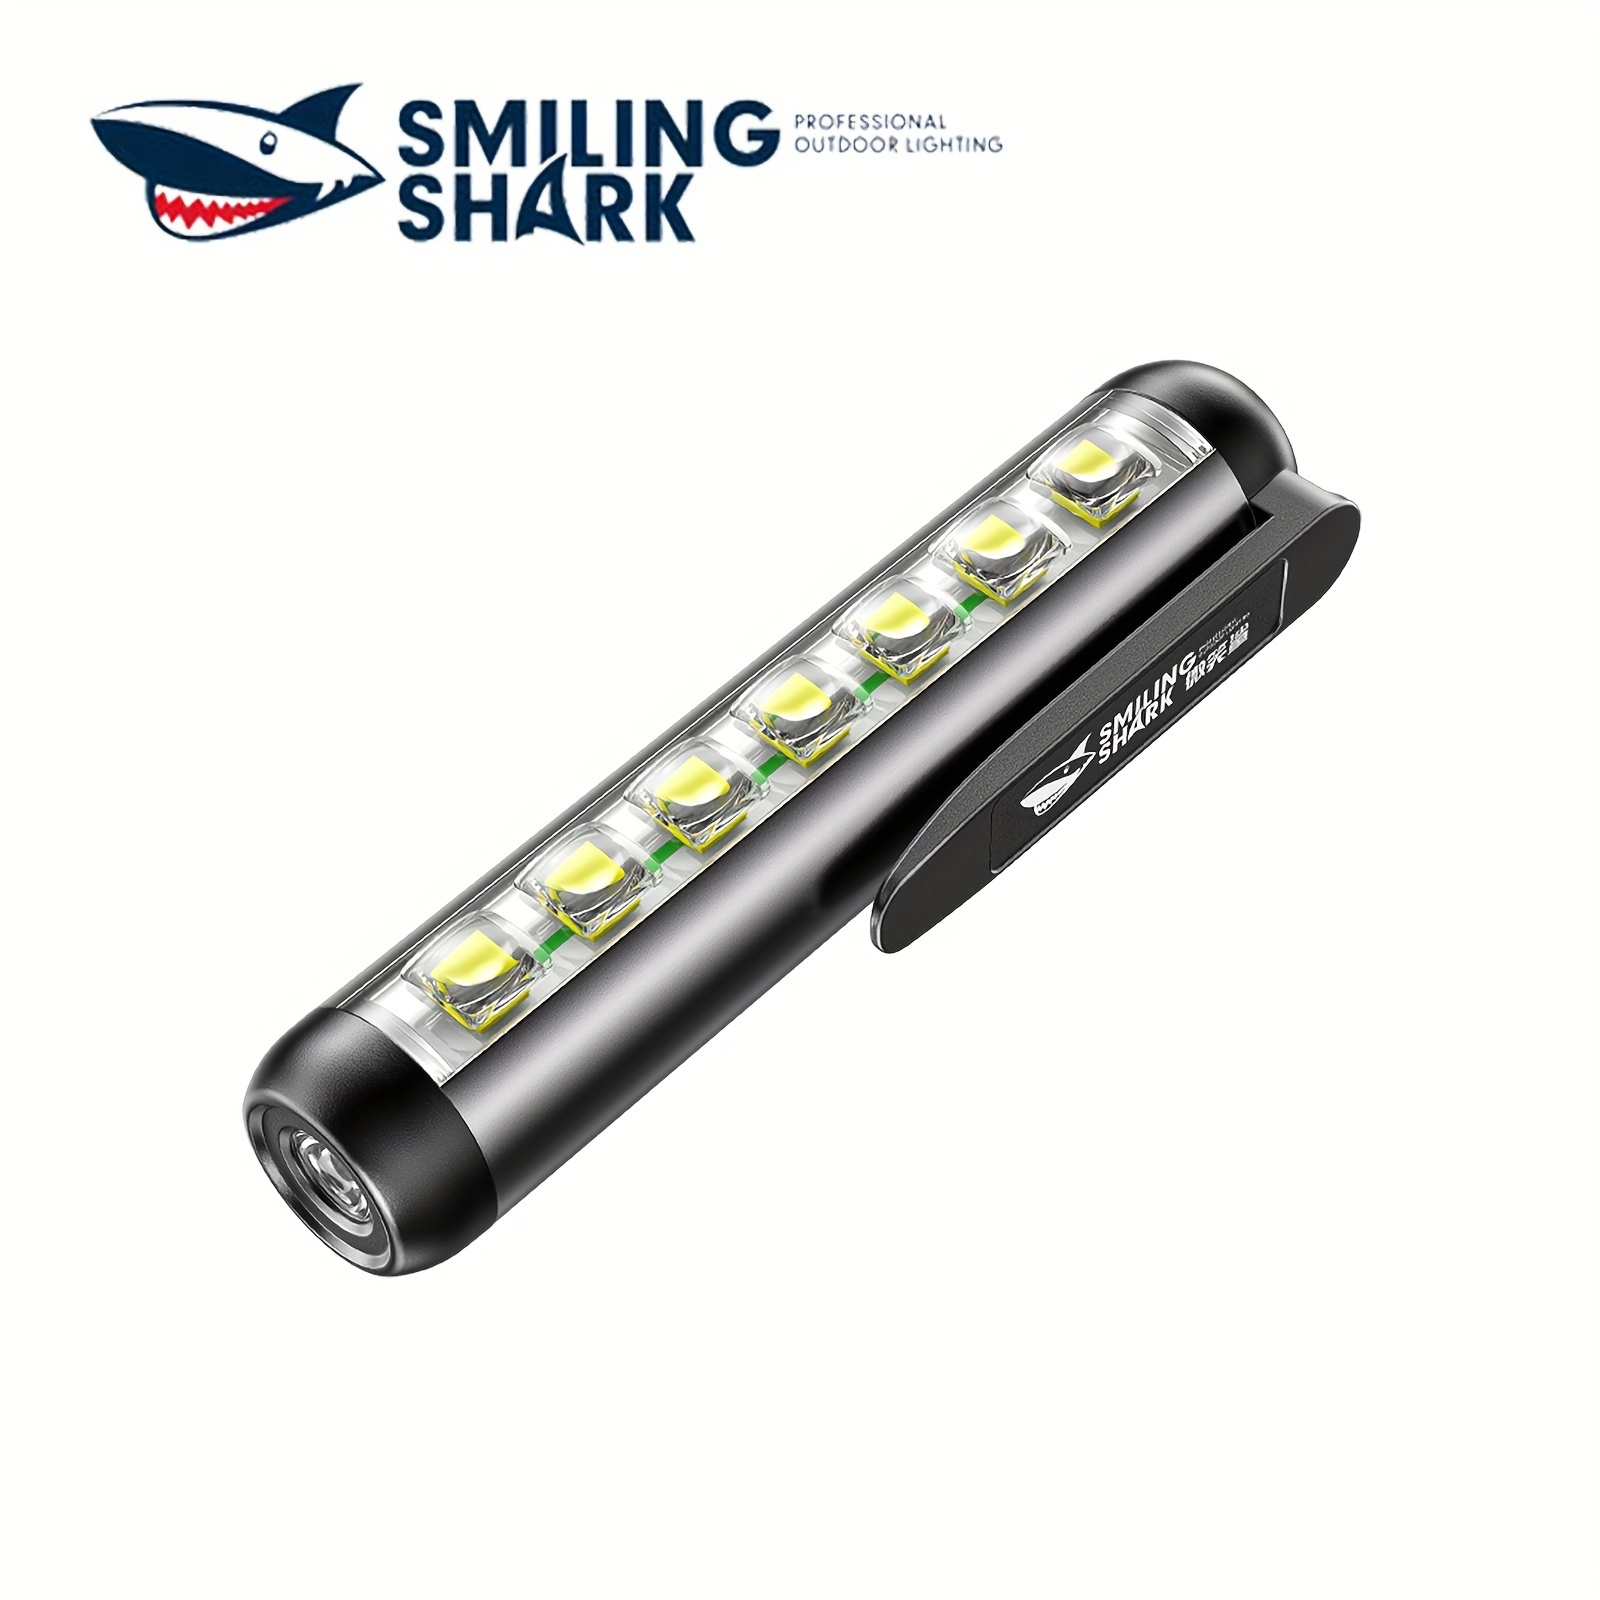 

1pc Smiling Shark Rechargeable Flashlight, Small Flashlights, Cob Sidelight Torch, Work Light With Clip And Magnet, For Working Repairing Camping Emergencies